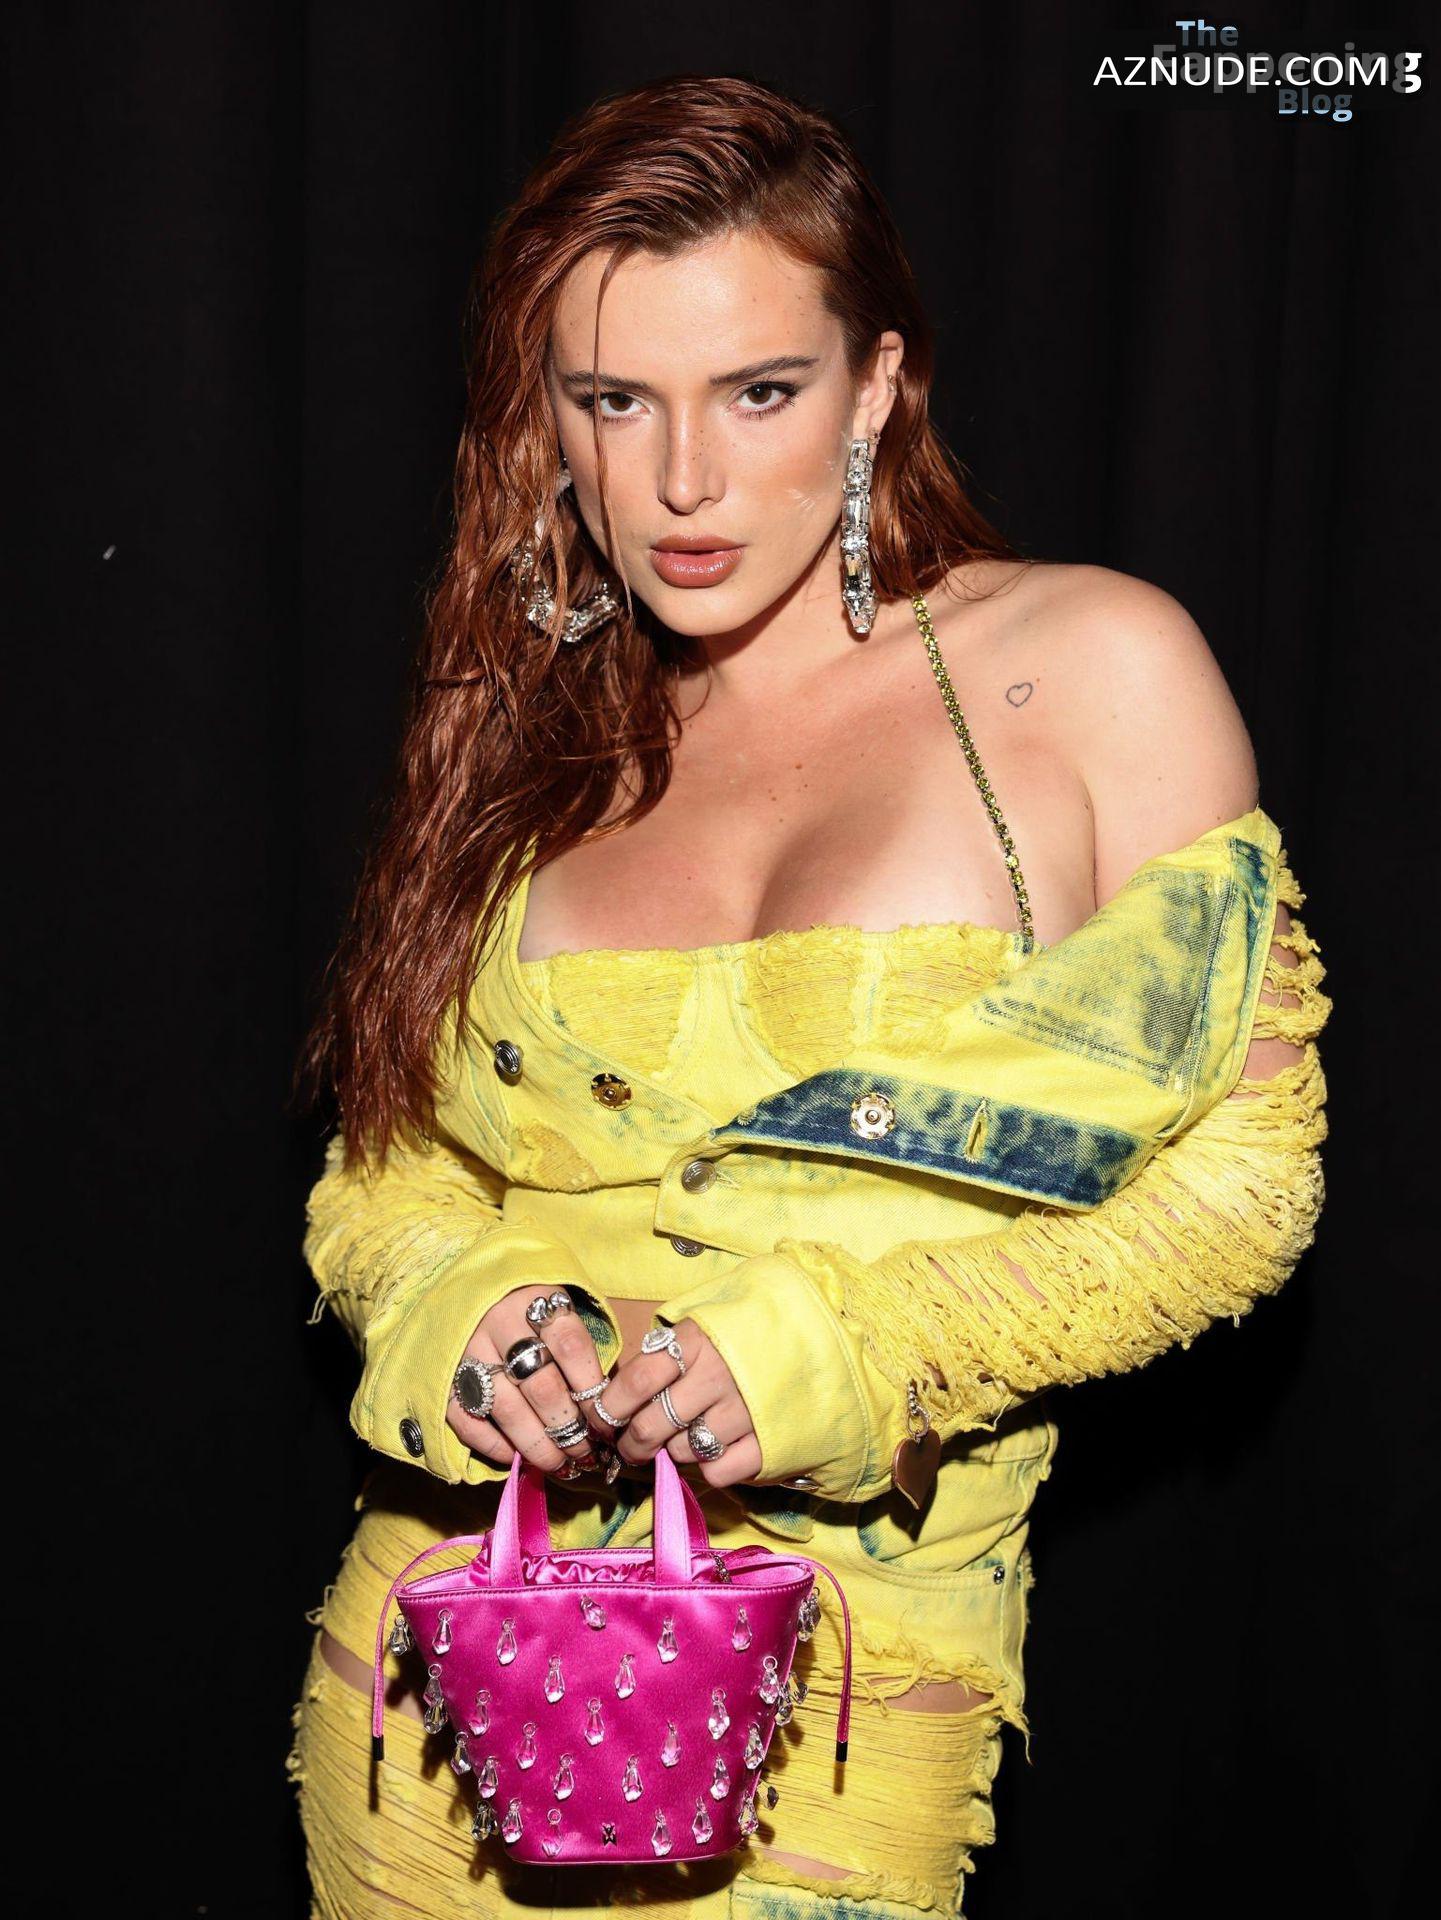 Bella Thorne Sexy Looks Stunning Wearing A Hot Yellow Outfit At The Gcds Fashion Show In Milan